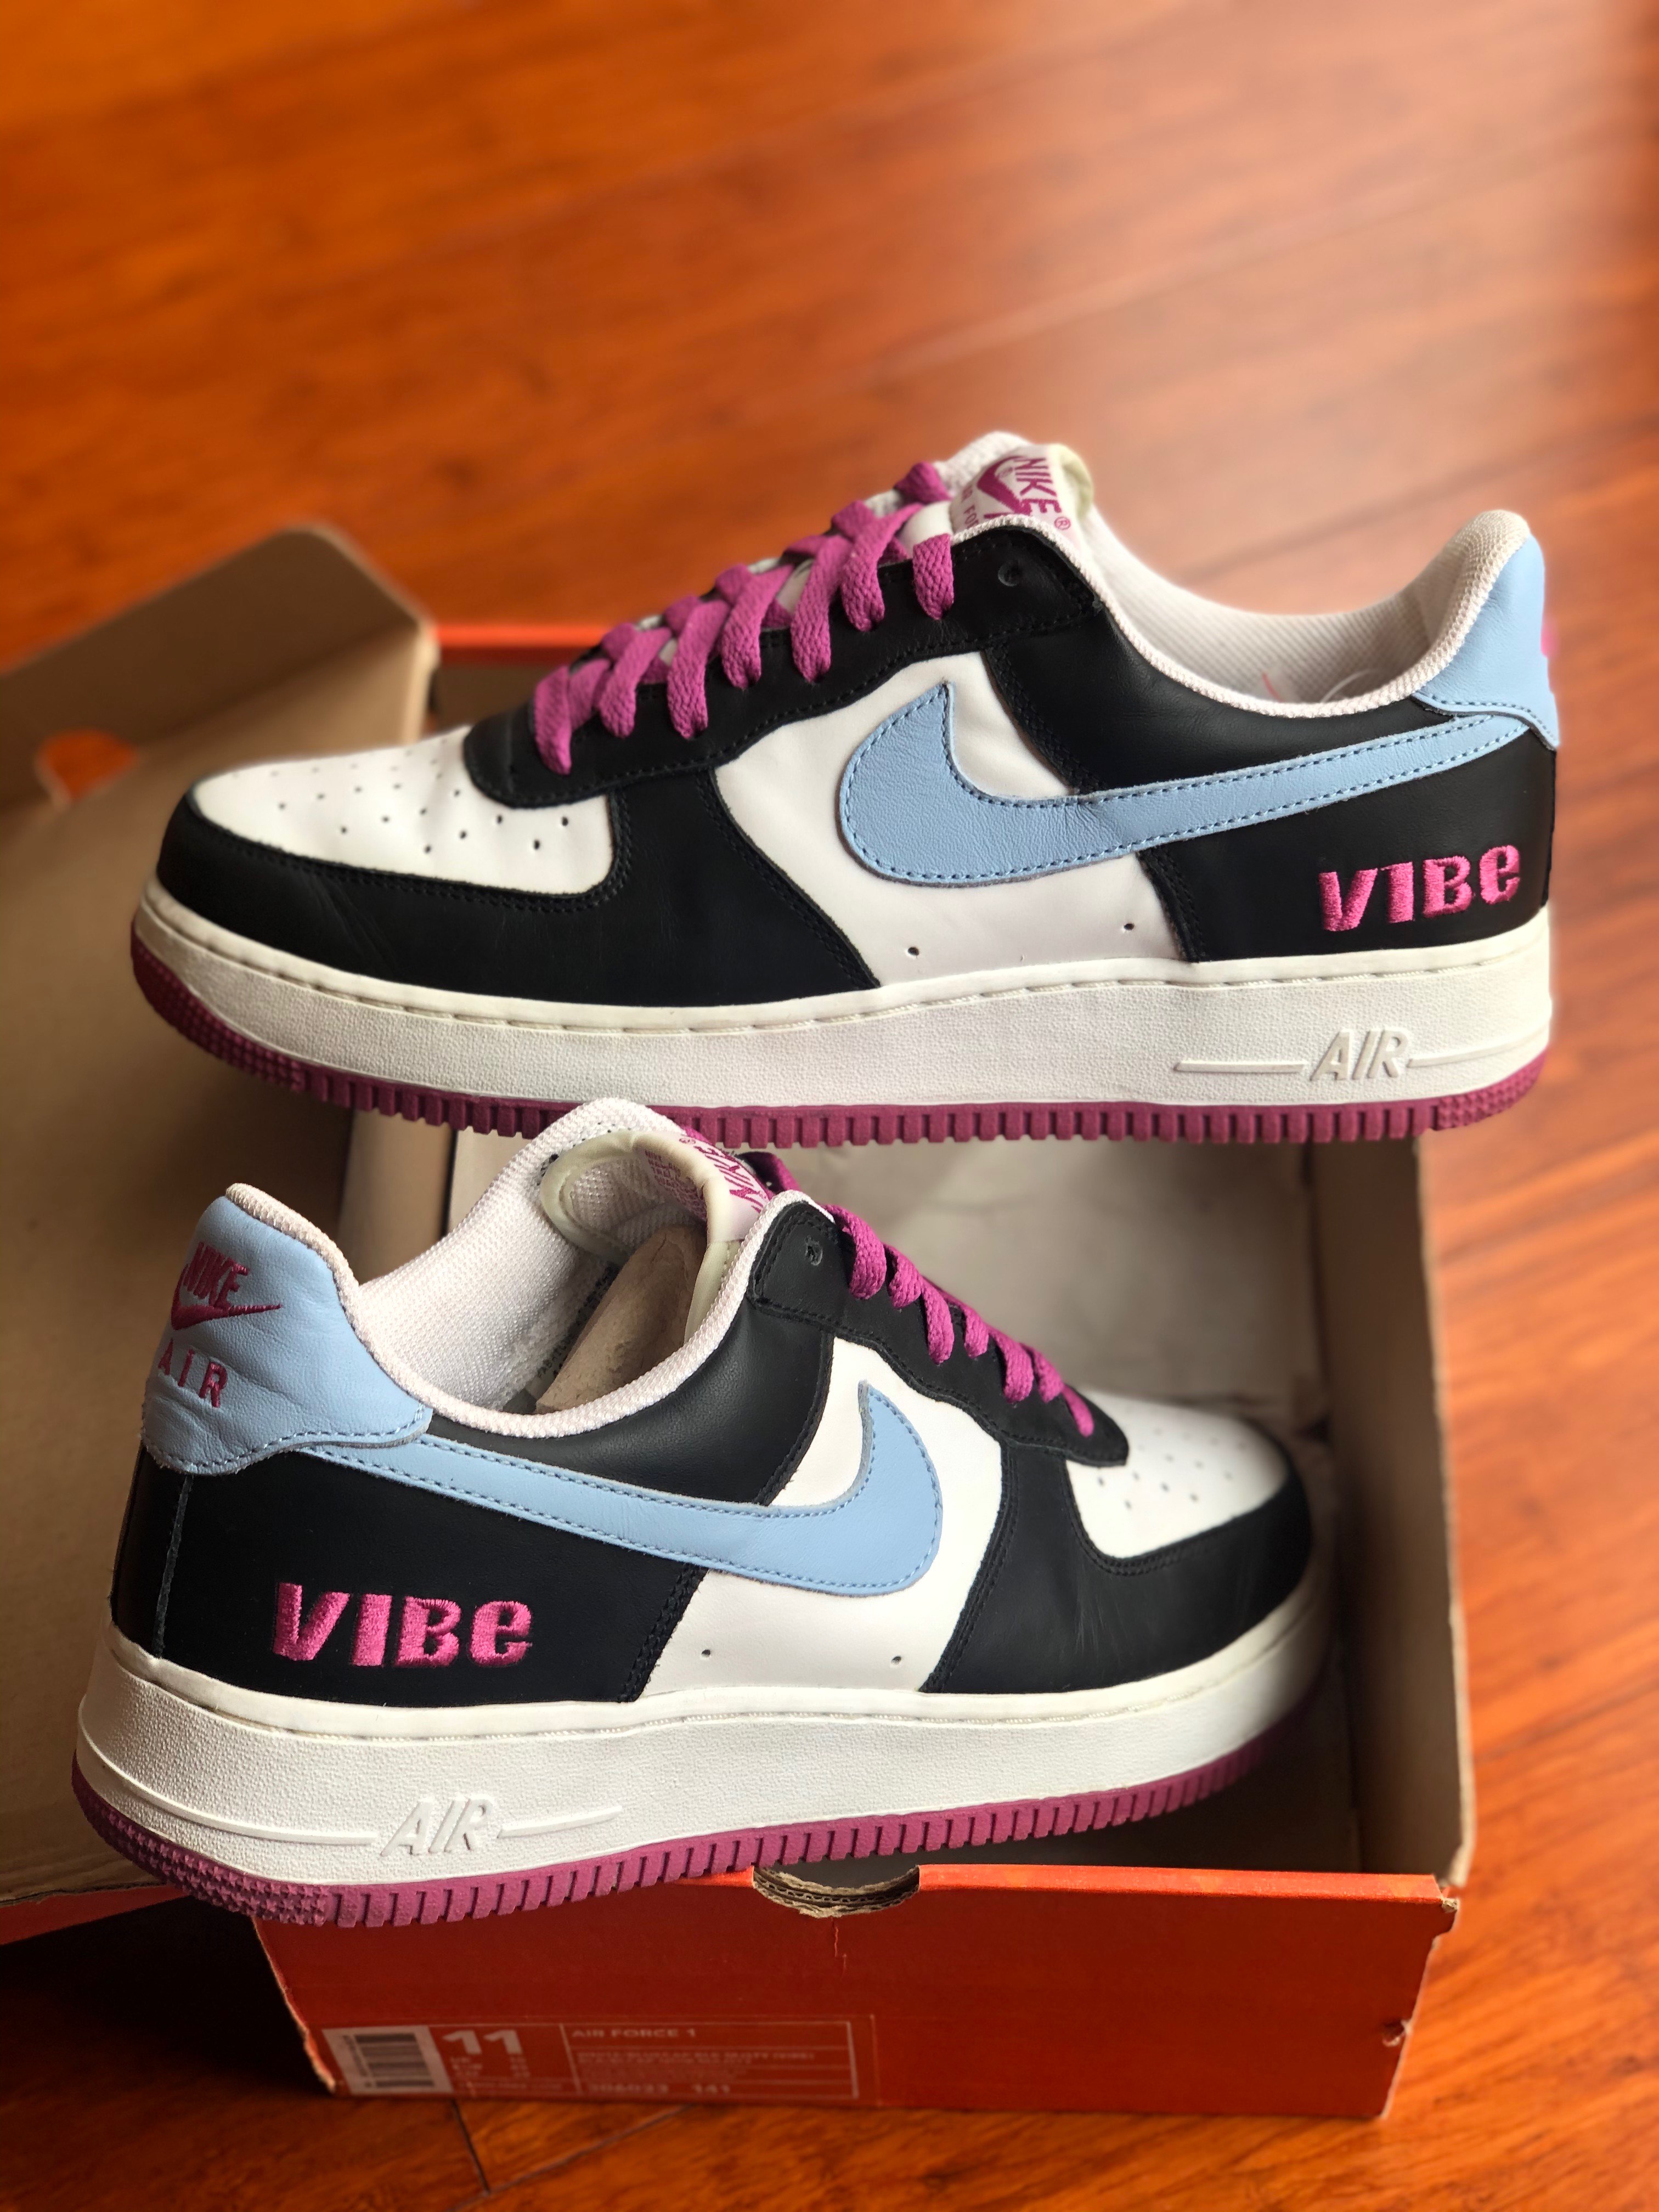 air force one shoes discontinued